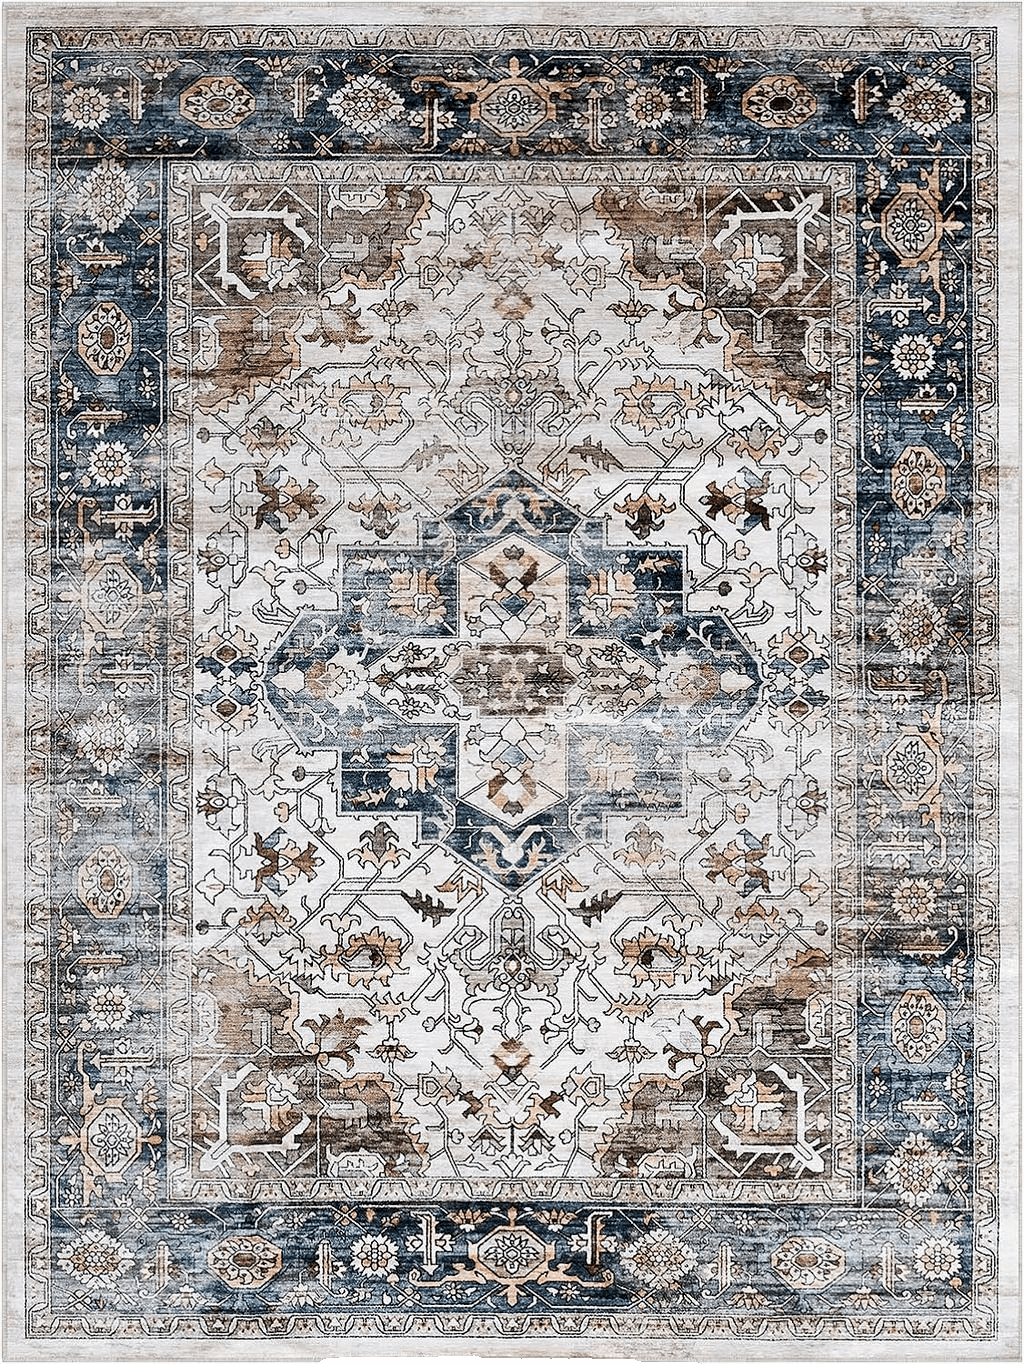 8x10 Area Rugs for Living Room: Washable Rugs Carpet for Living Room with Non-Slip Backing Non-Shedding Stain Resistant, Boho Floral Large Rugs for Dining Room Nursery Home Office (Blue Multi)